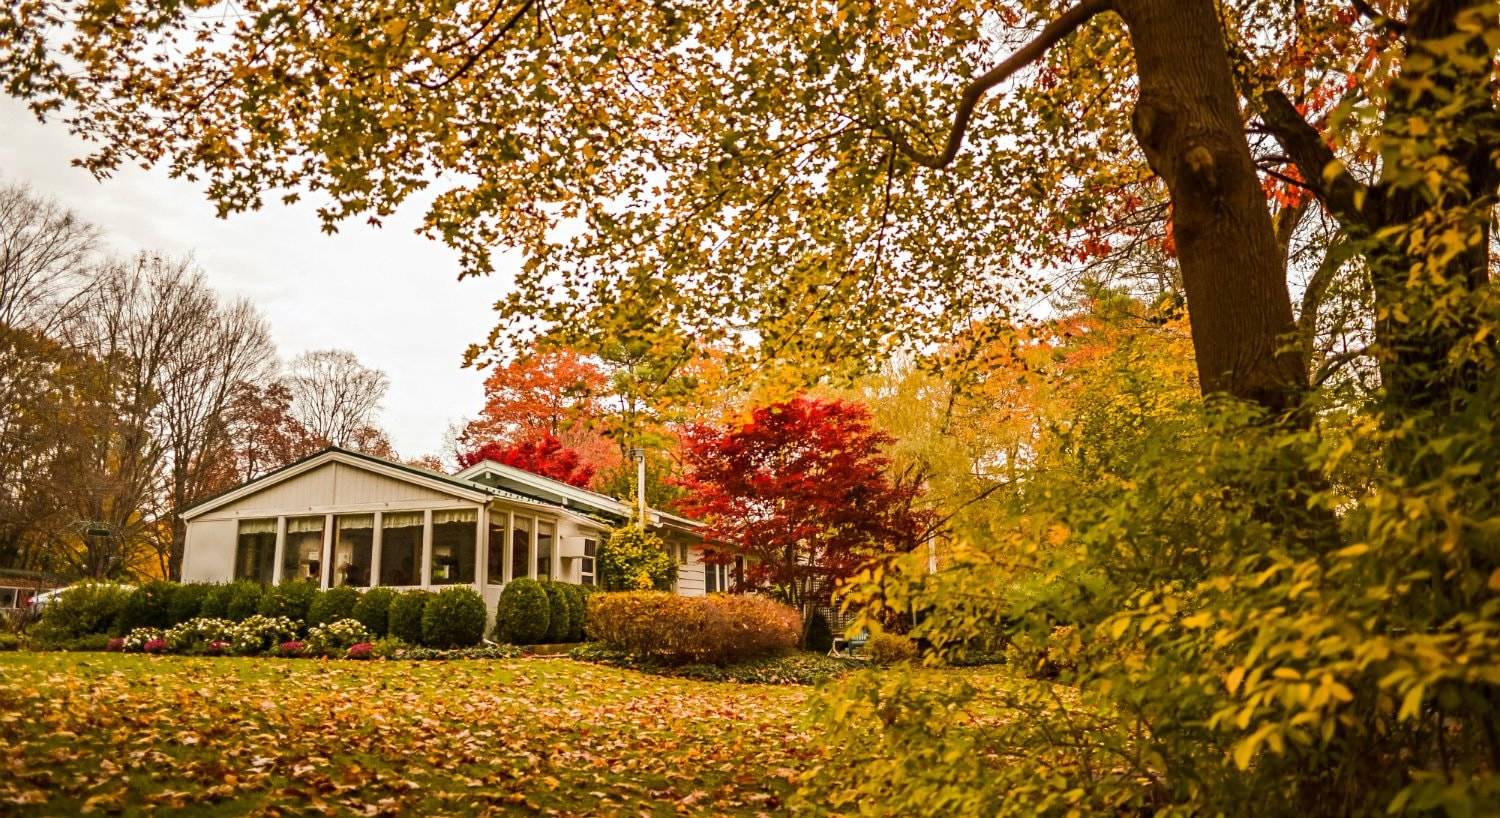 White cottage surrounded by trees with red, orange, and green leaves, and grass topped with fallen leaves